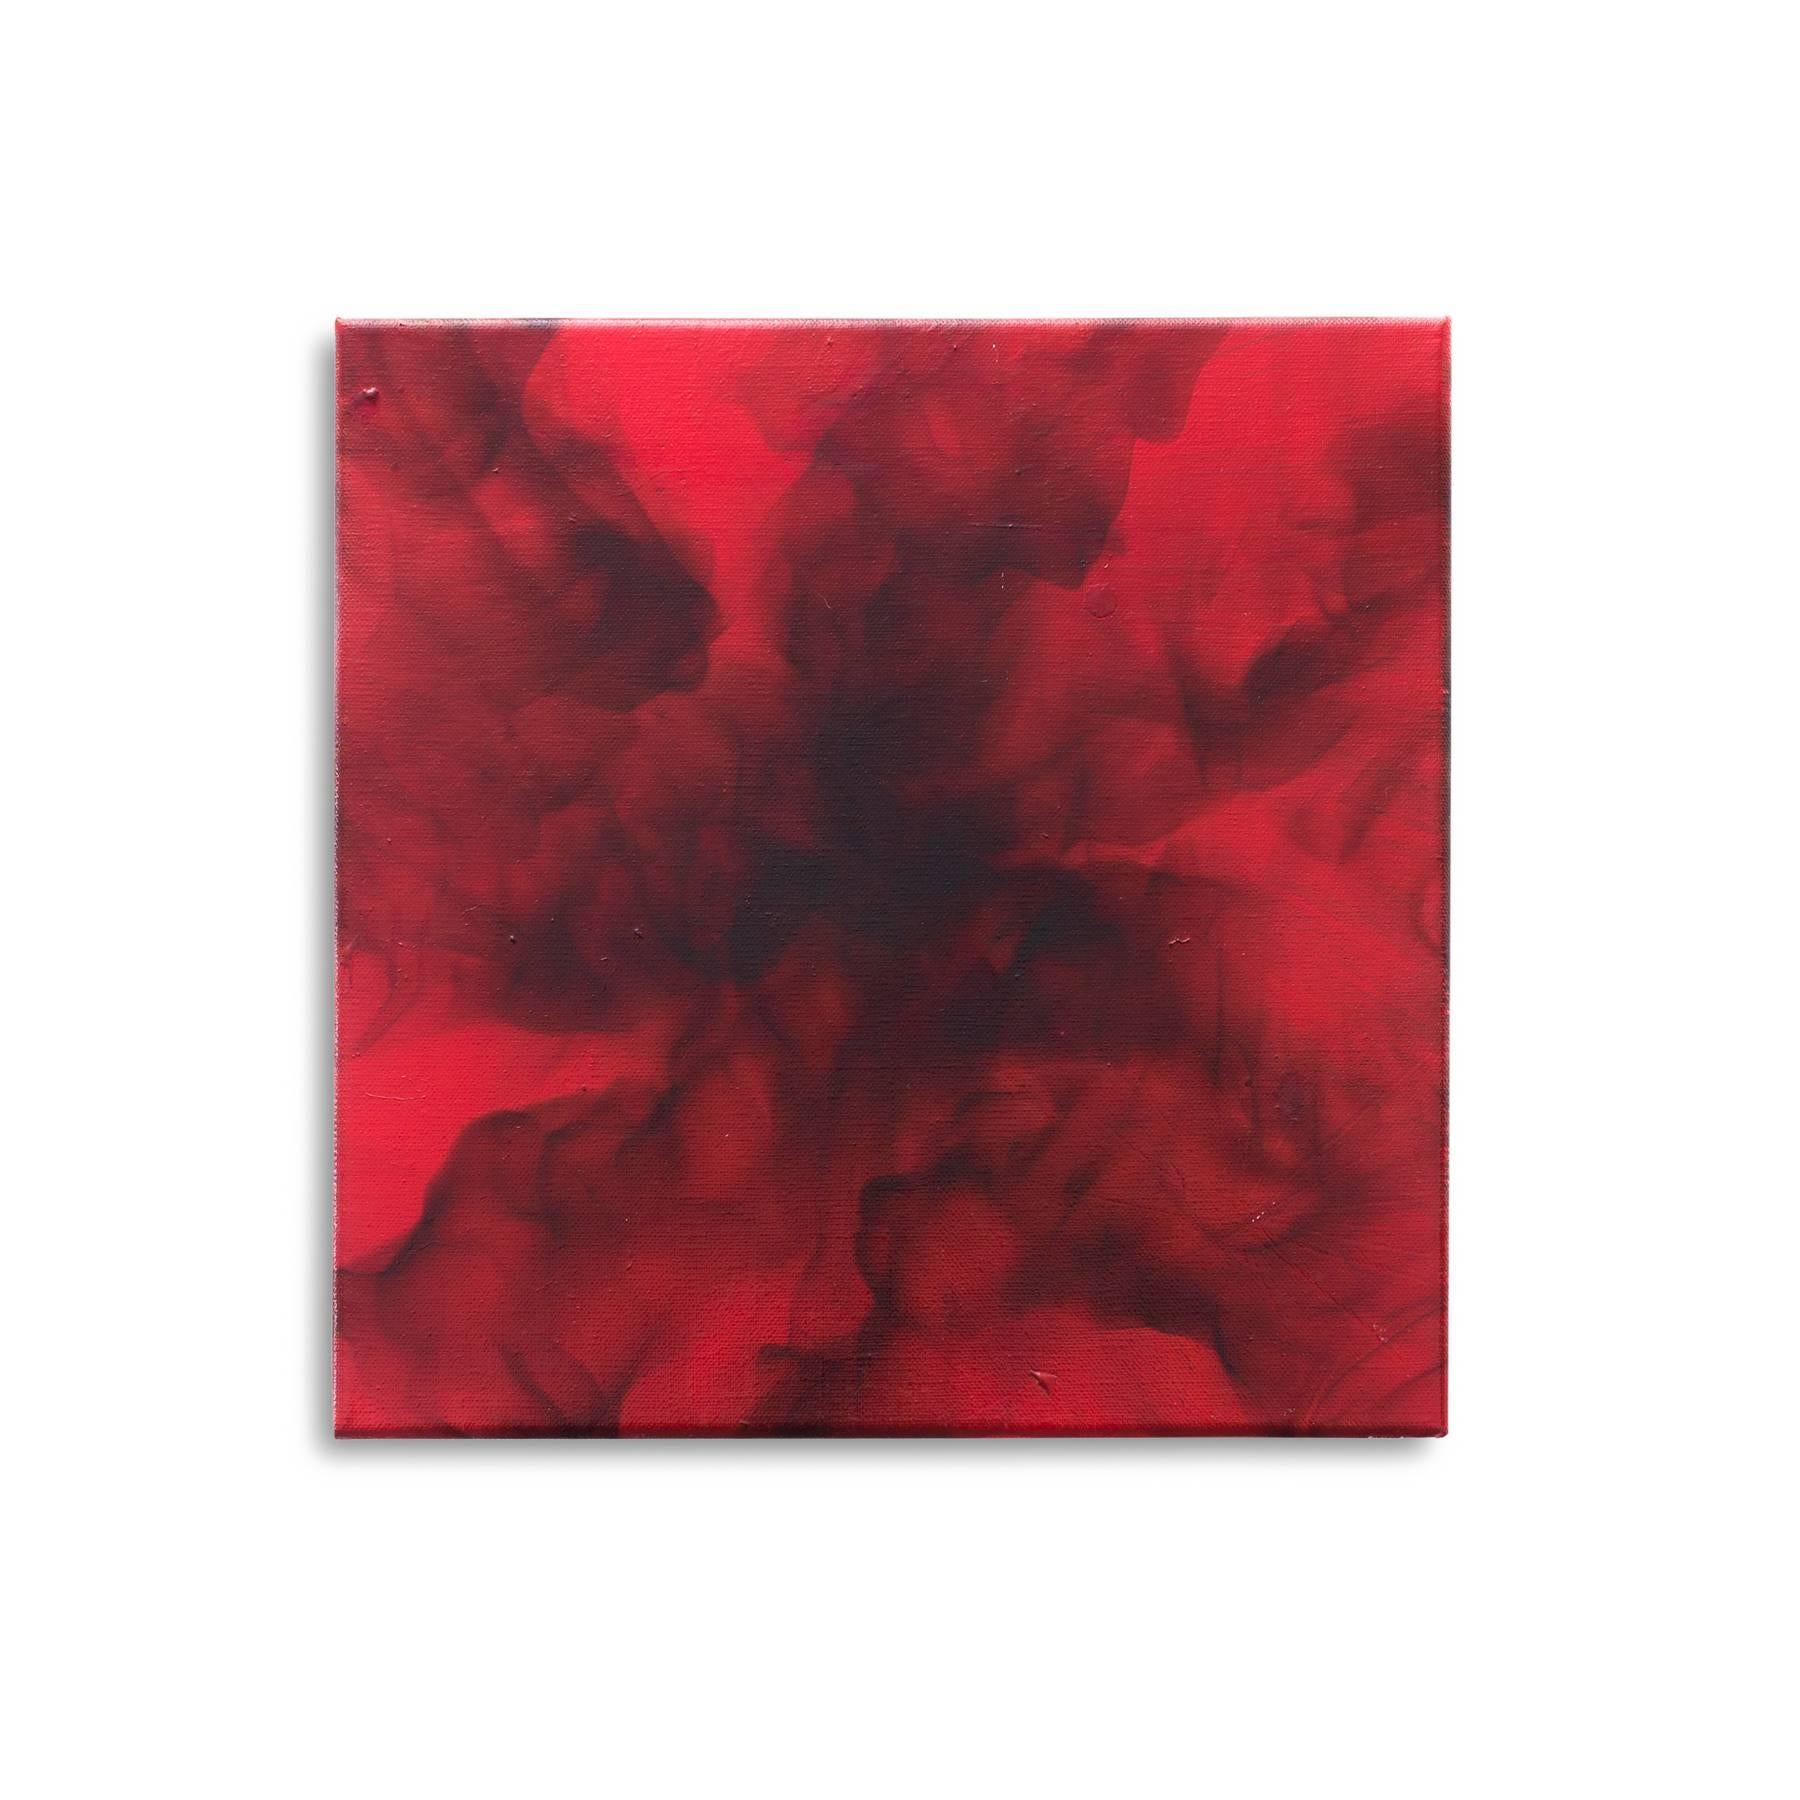 Tara Walters Abstract Painting - Atomic Bomb, 2017, red oil smoke painting on linen